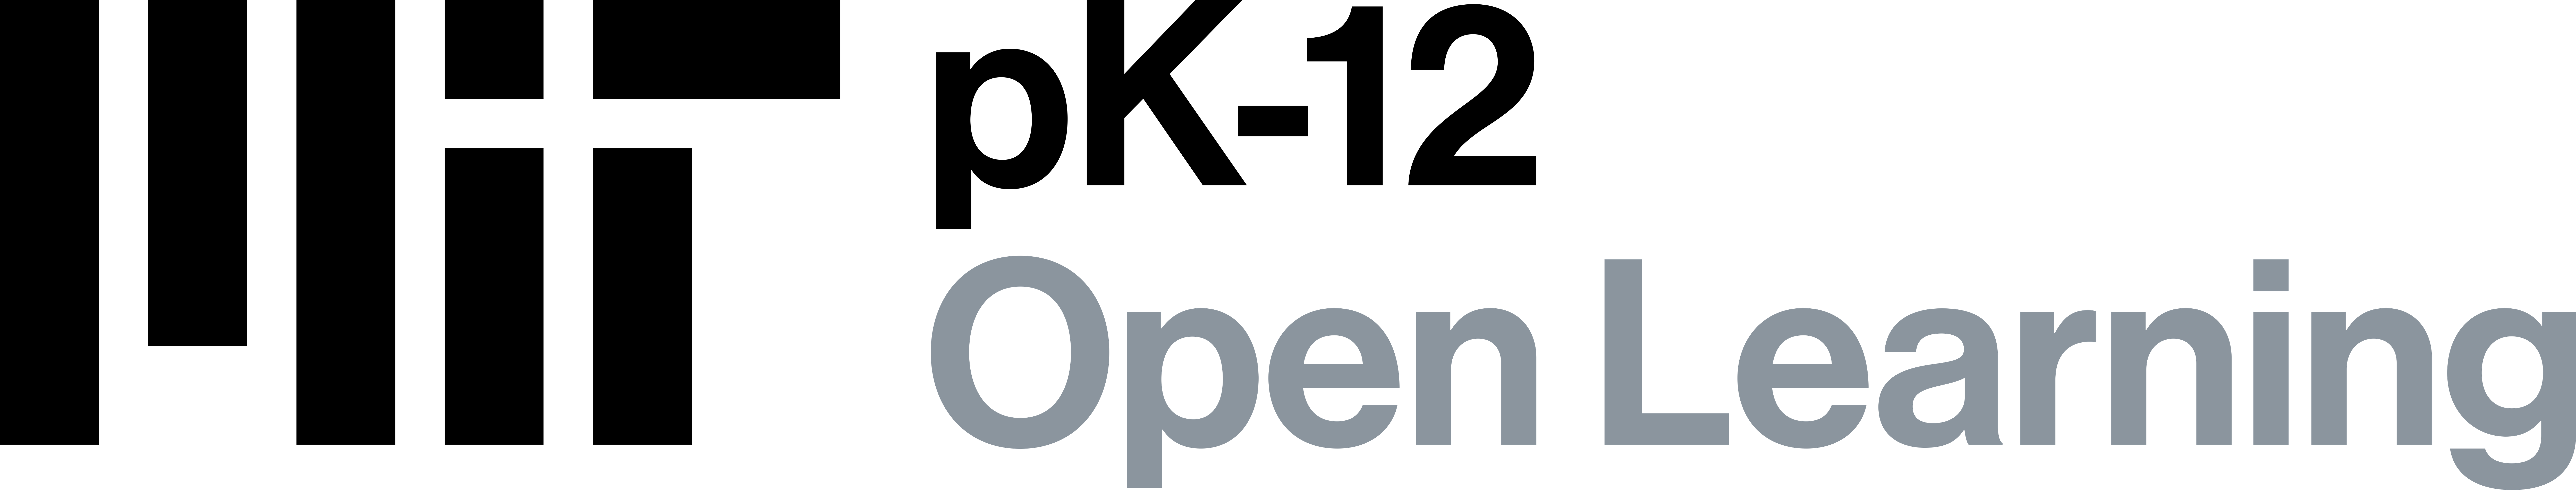 MIT Open Learning pK-12 text-based logo